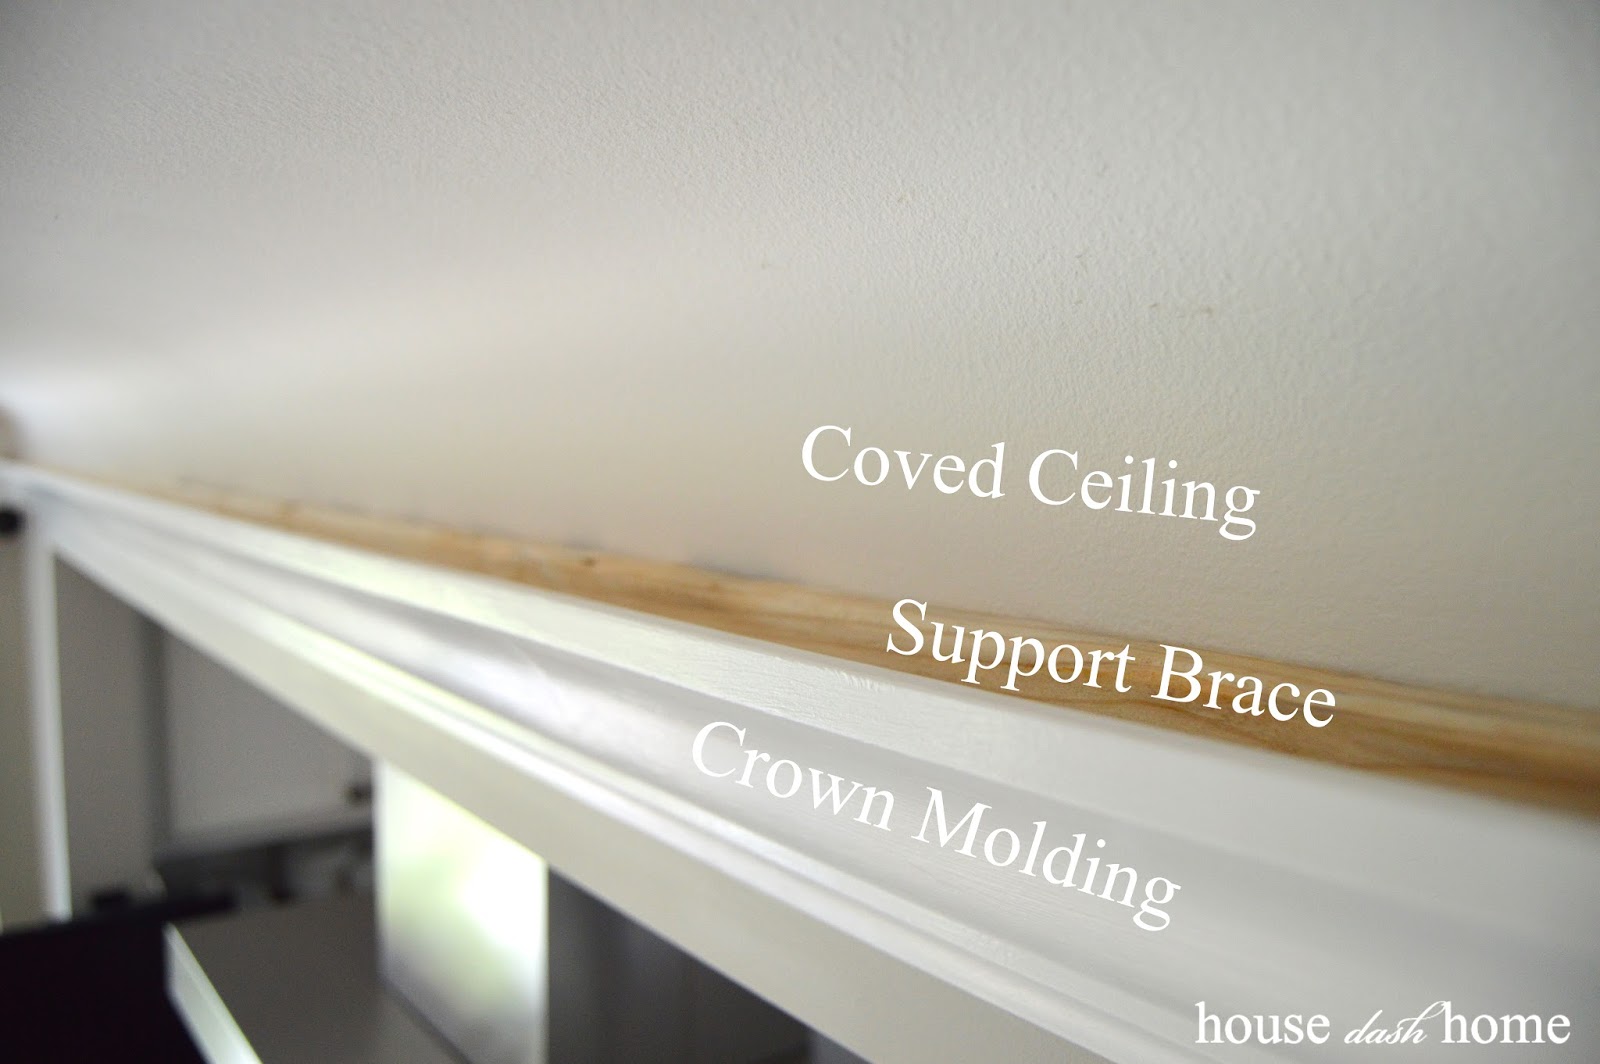 House Dash Home Adding Crown Molding To Coved Ceilings